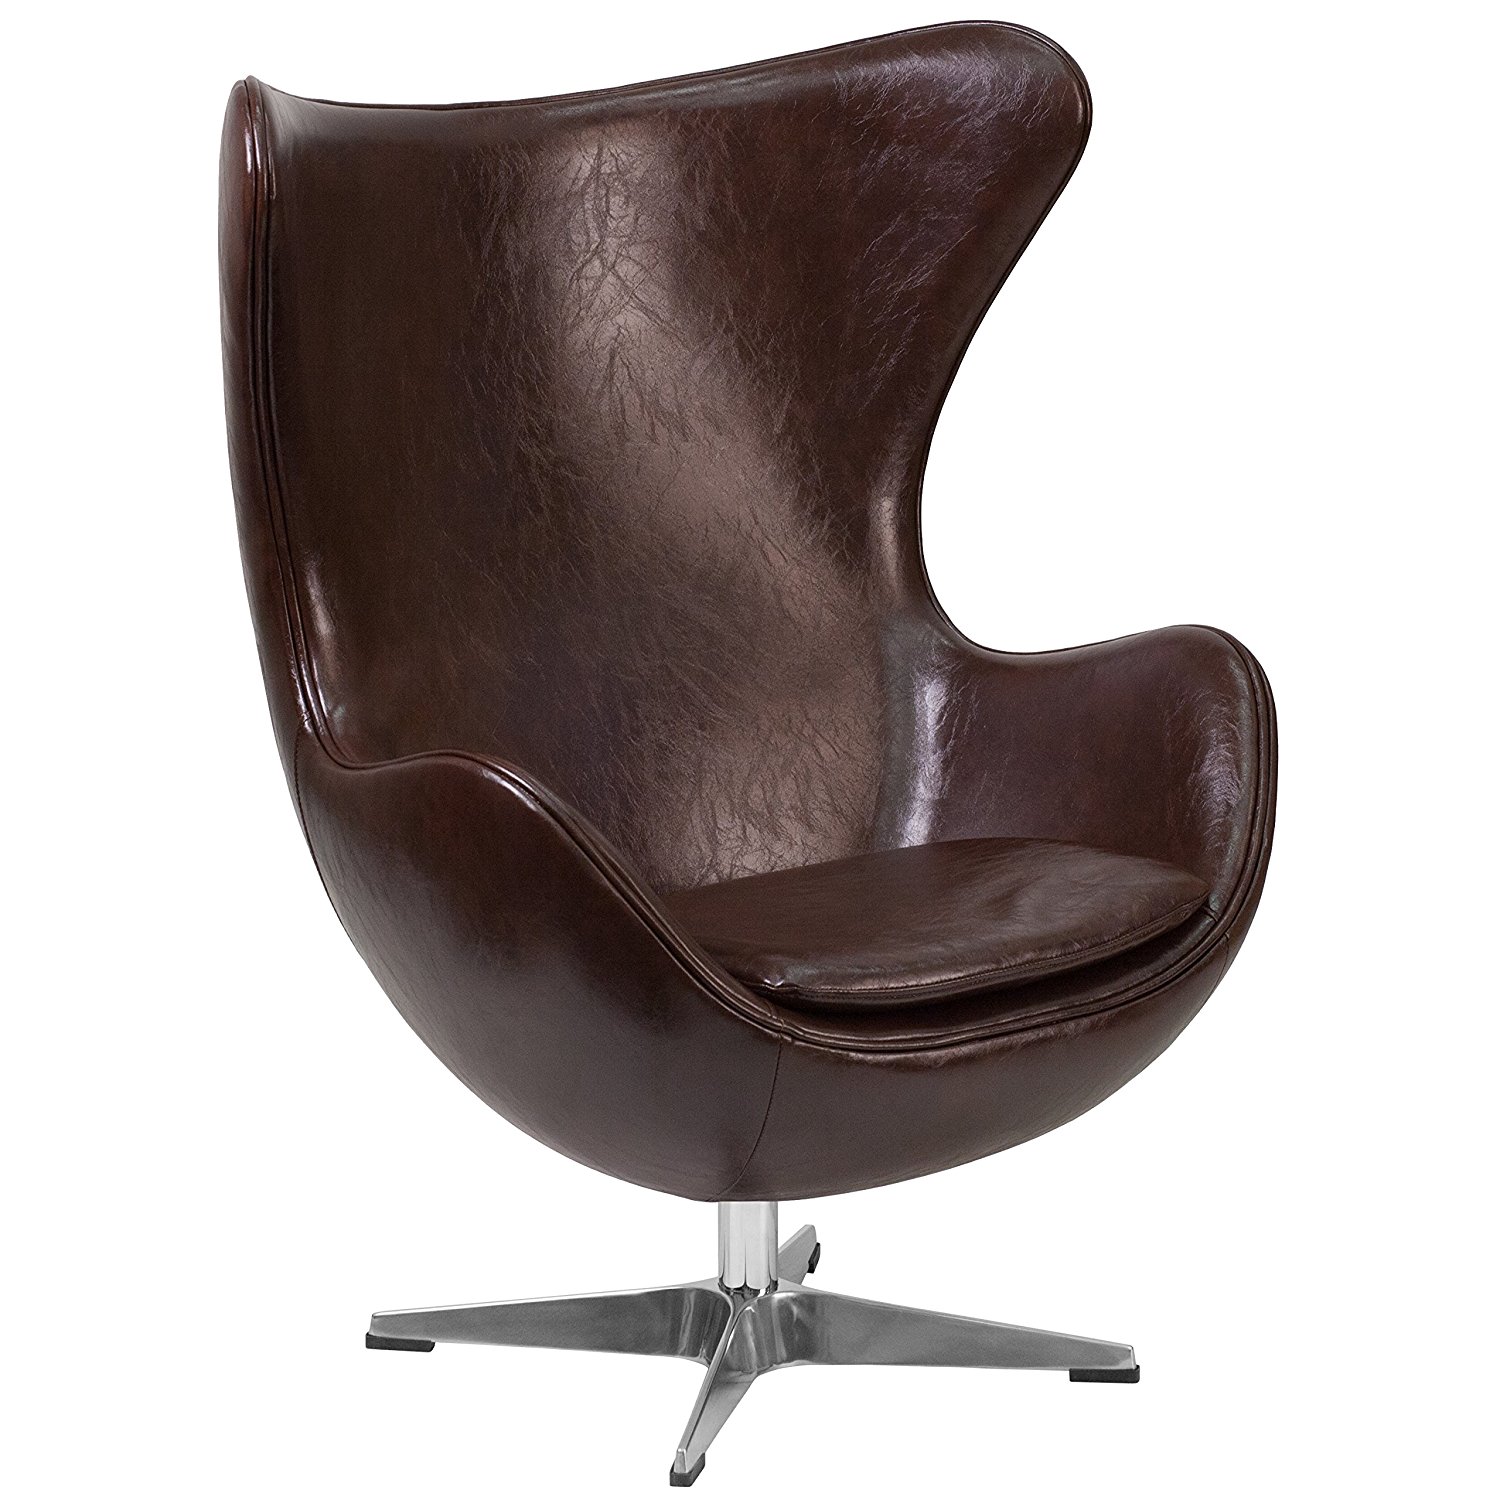 Espresso Brown Leather Egg Chair - & Retro Lounge Chairs - Egg Chair